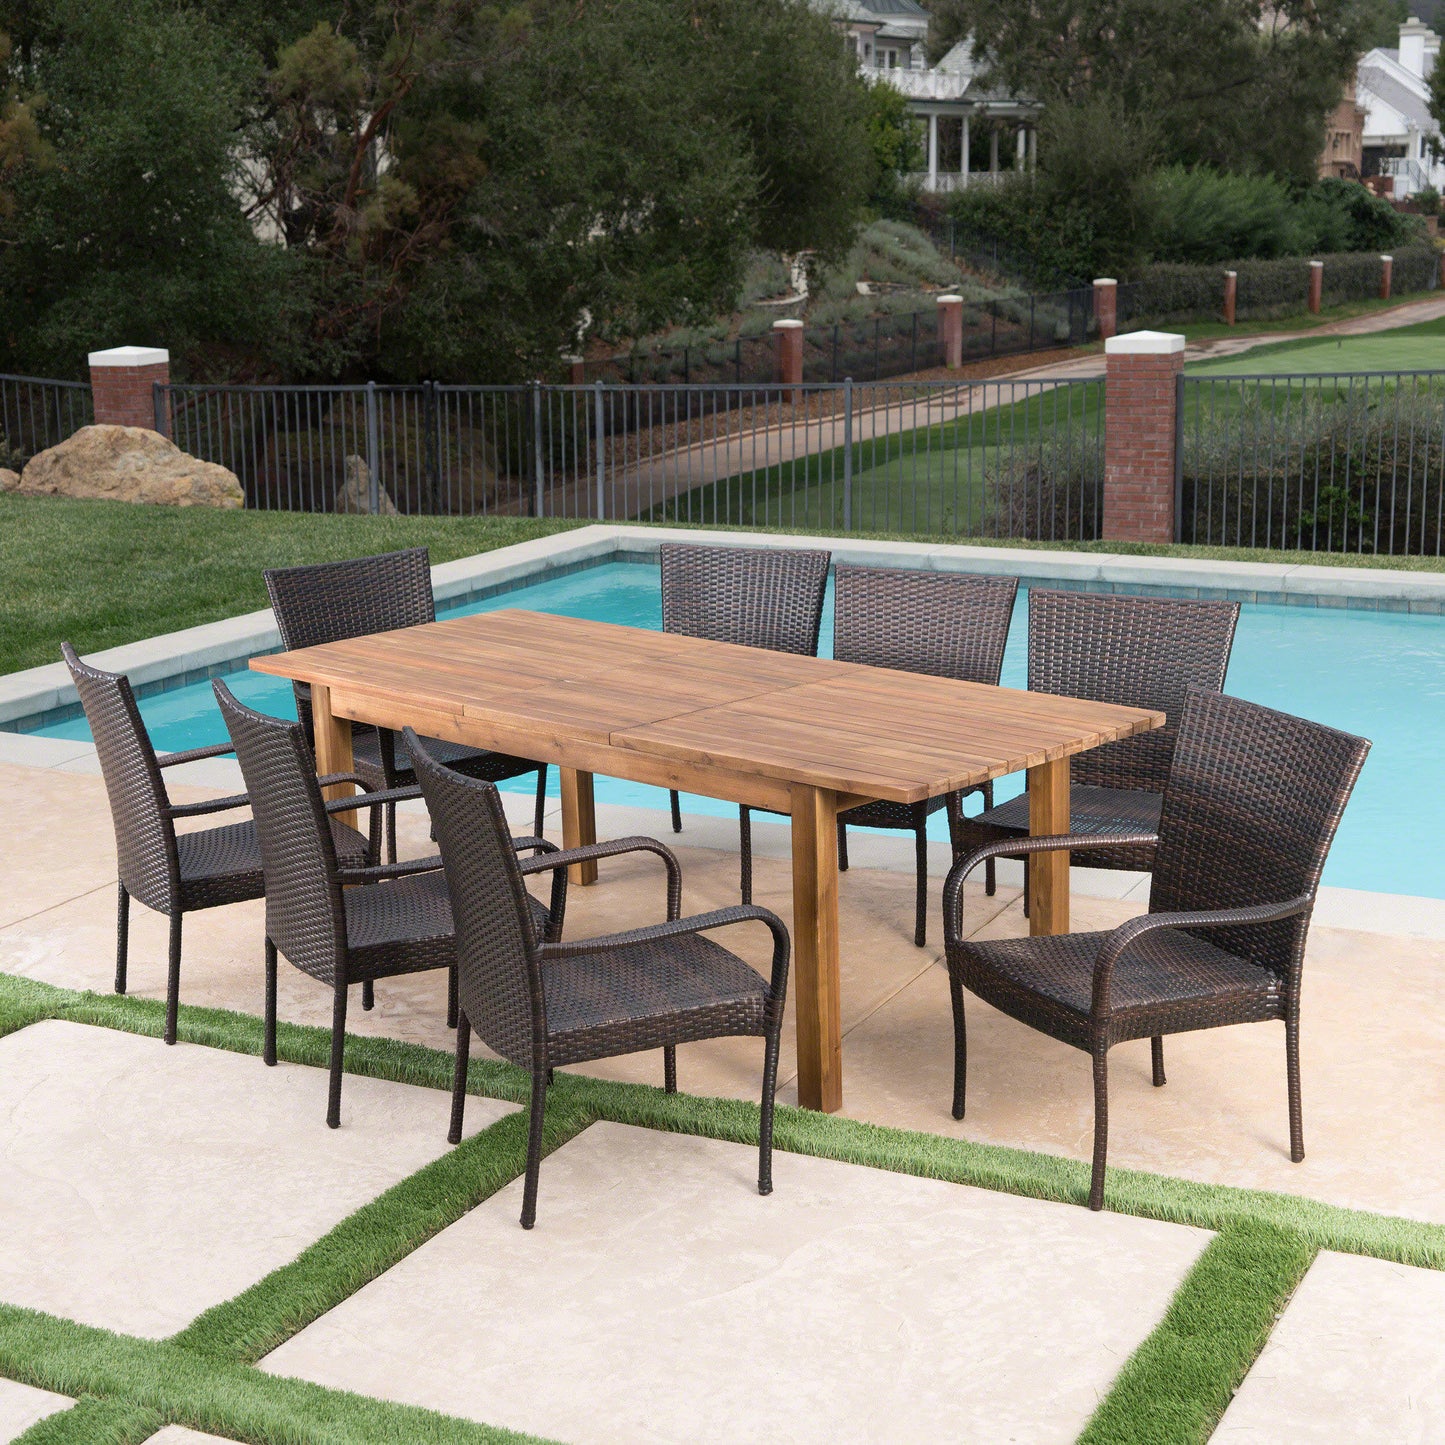 Delilah Outdoor 9 Piece Wicker Dining Set with Wood Expandable Dining Table